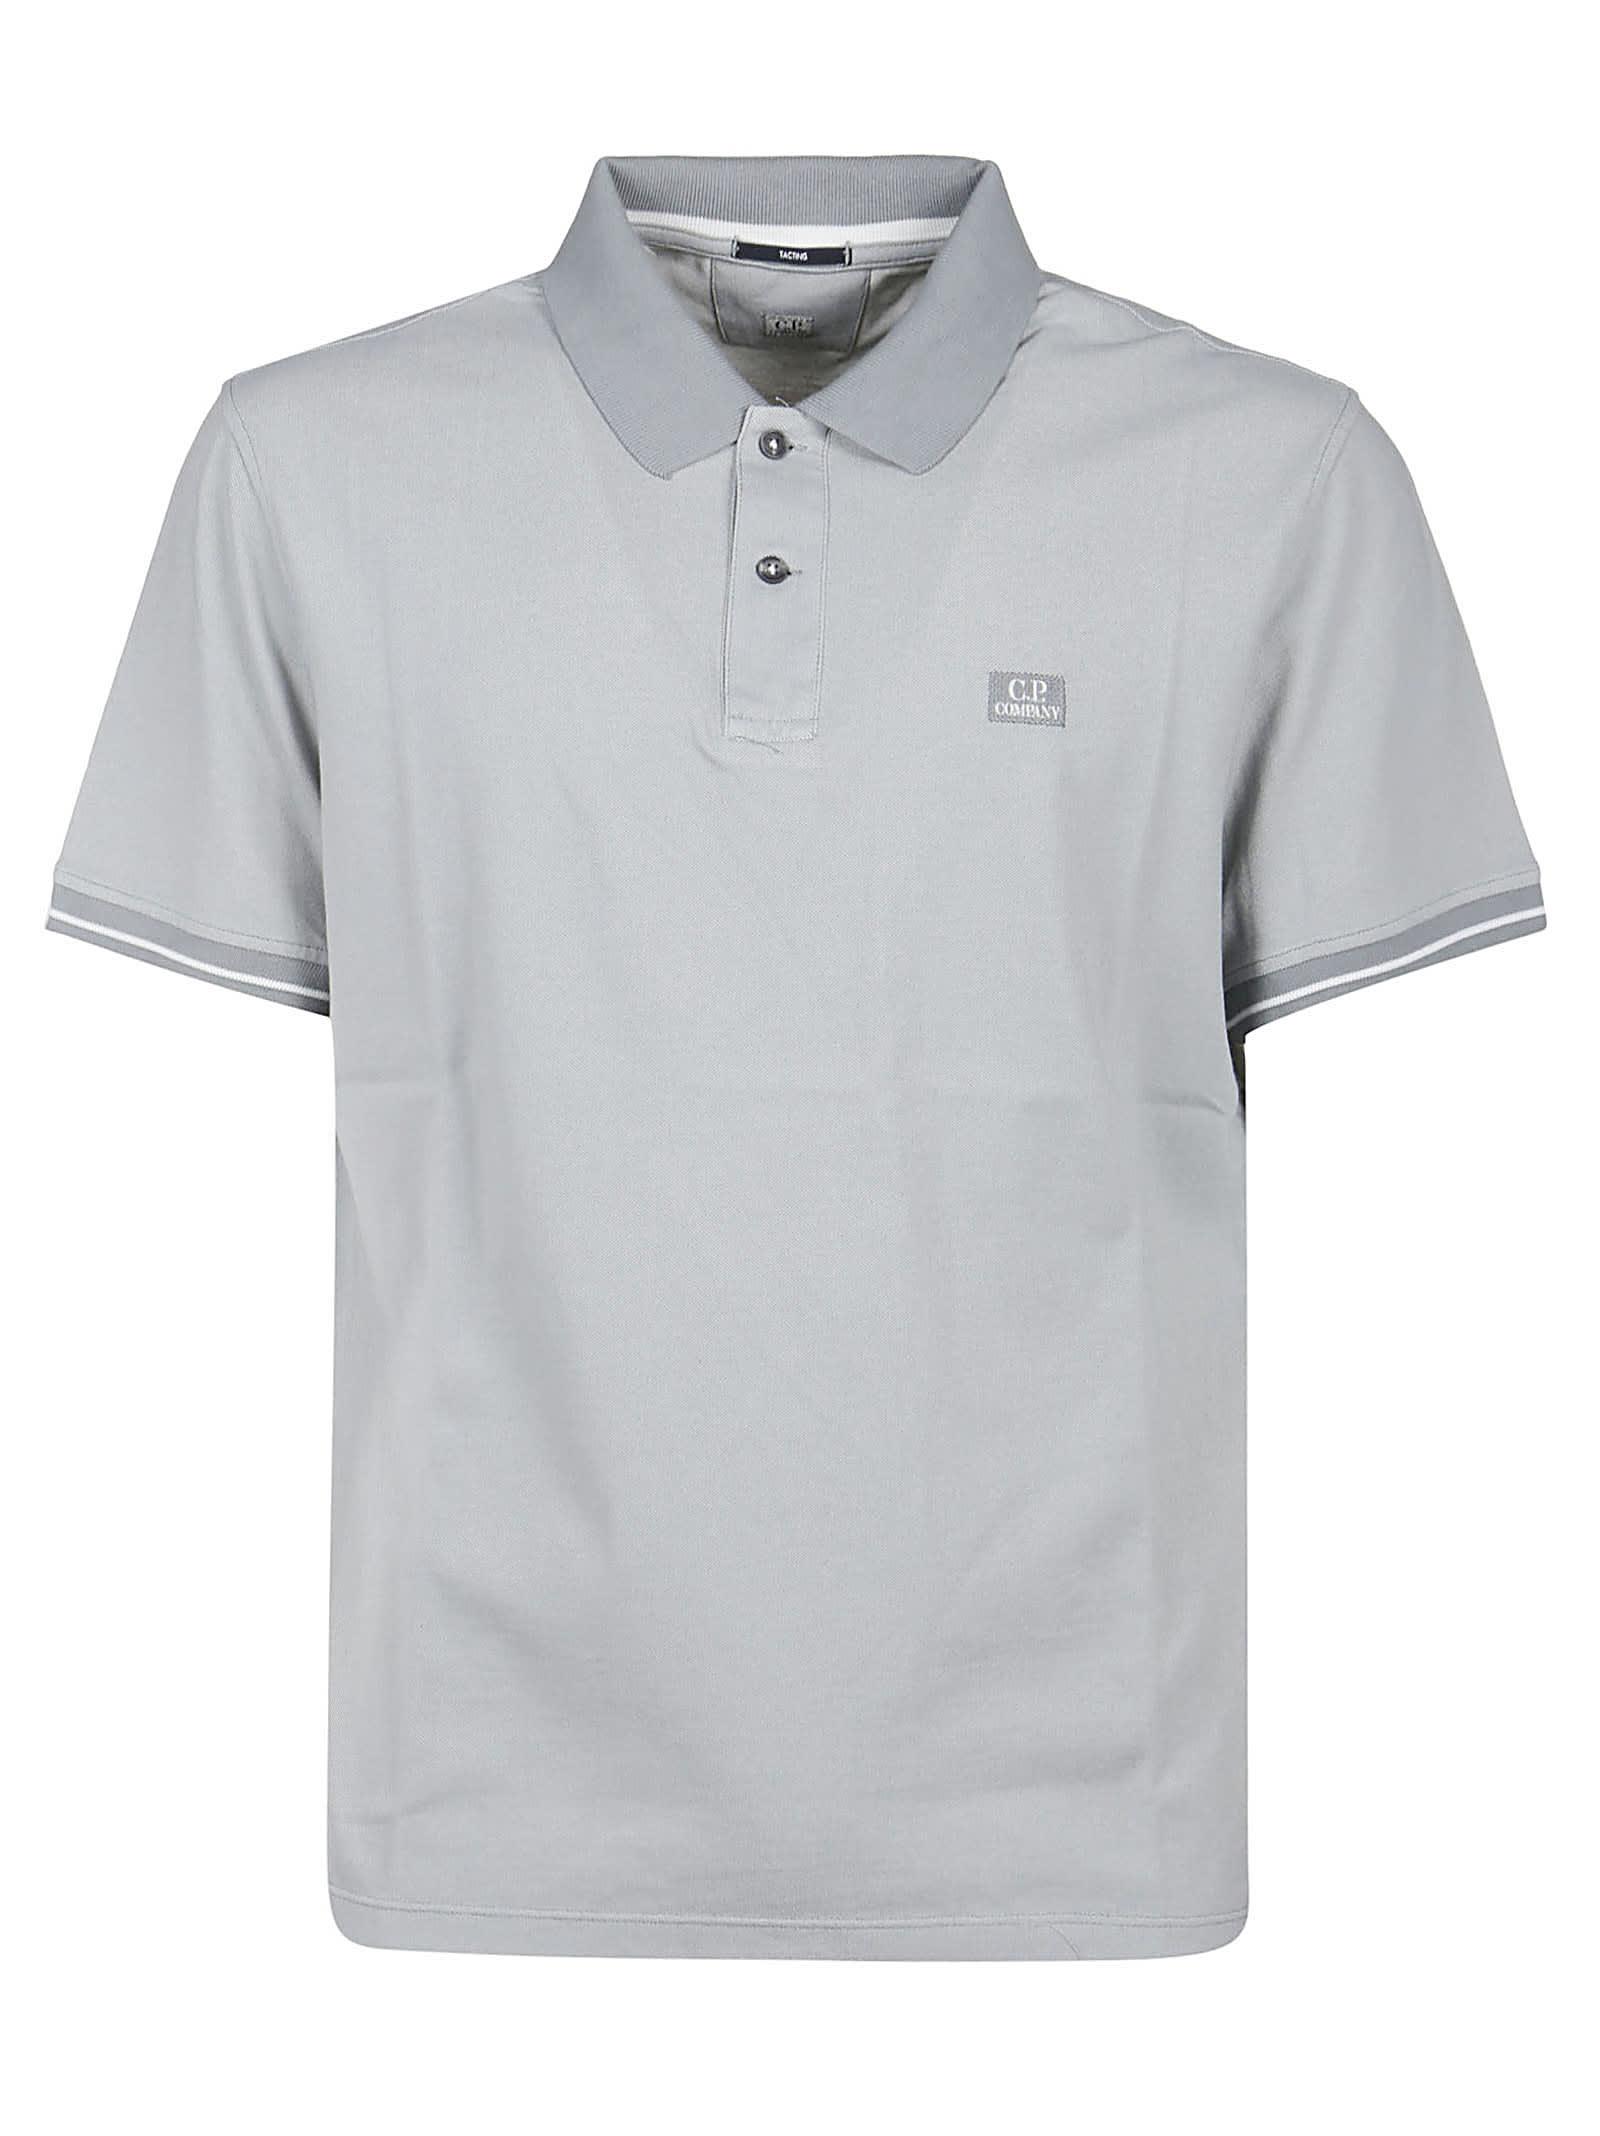 C.P. Company Tacting Logo Polo Shirt in Gray for Men | Lyst